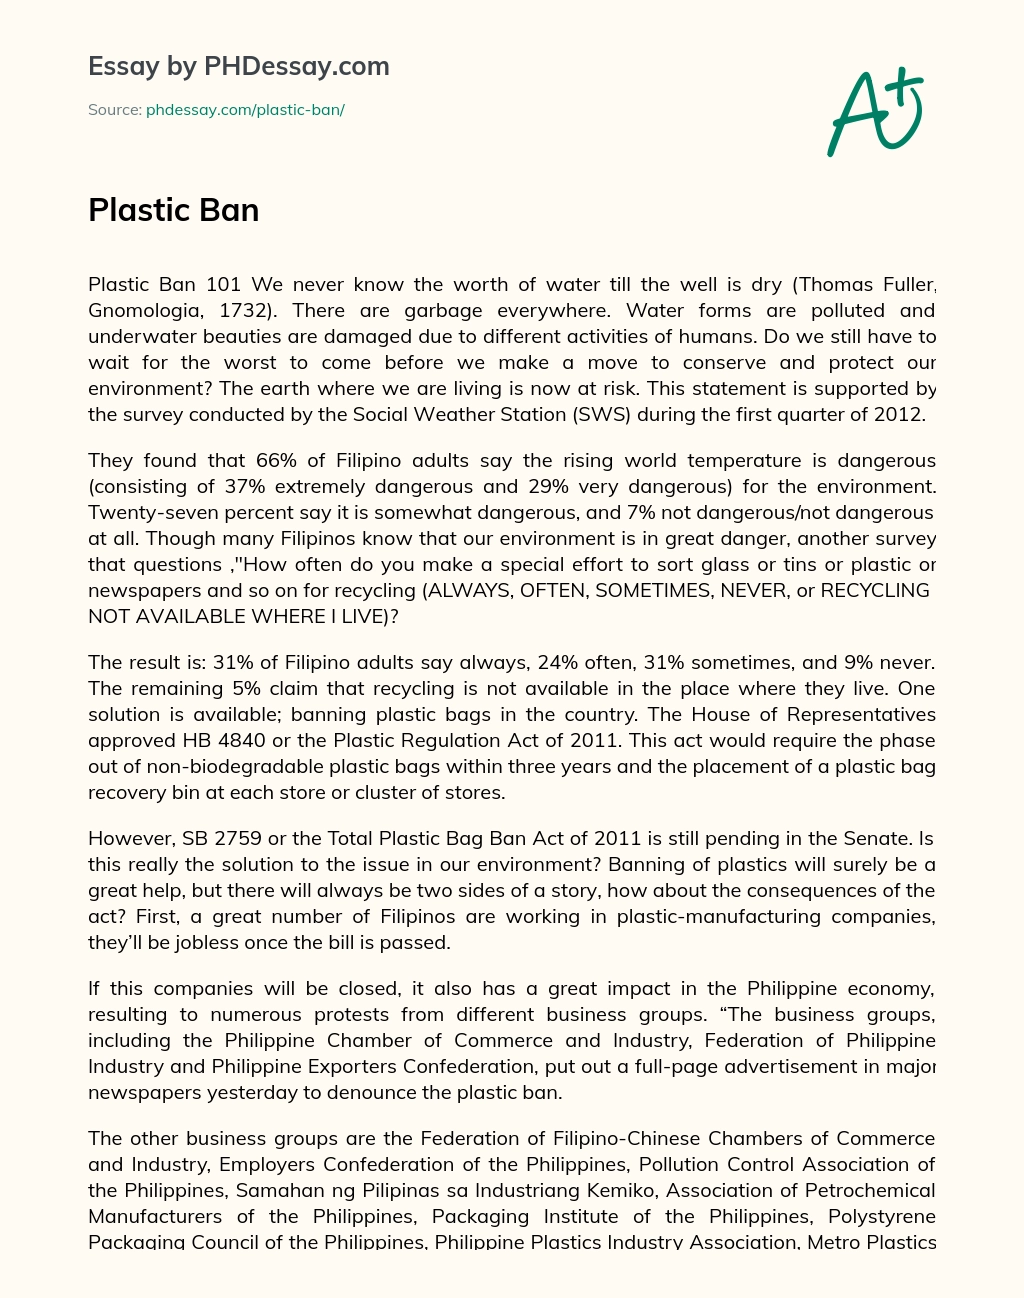 Plastic Ban 101: Protecting the Environment from Human Activities essay